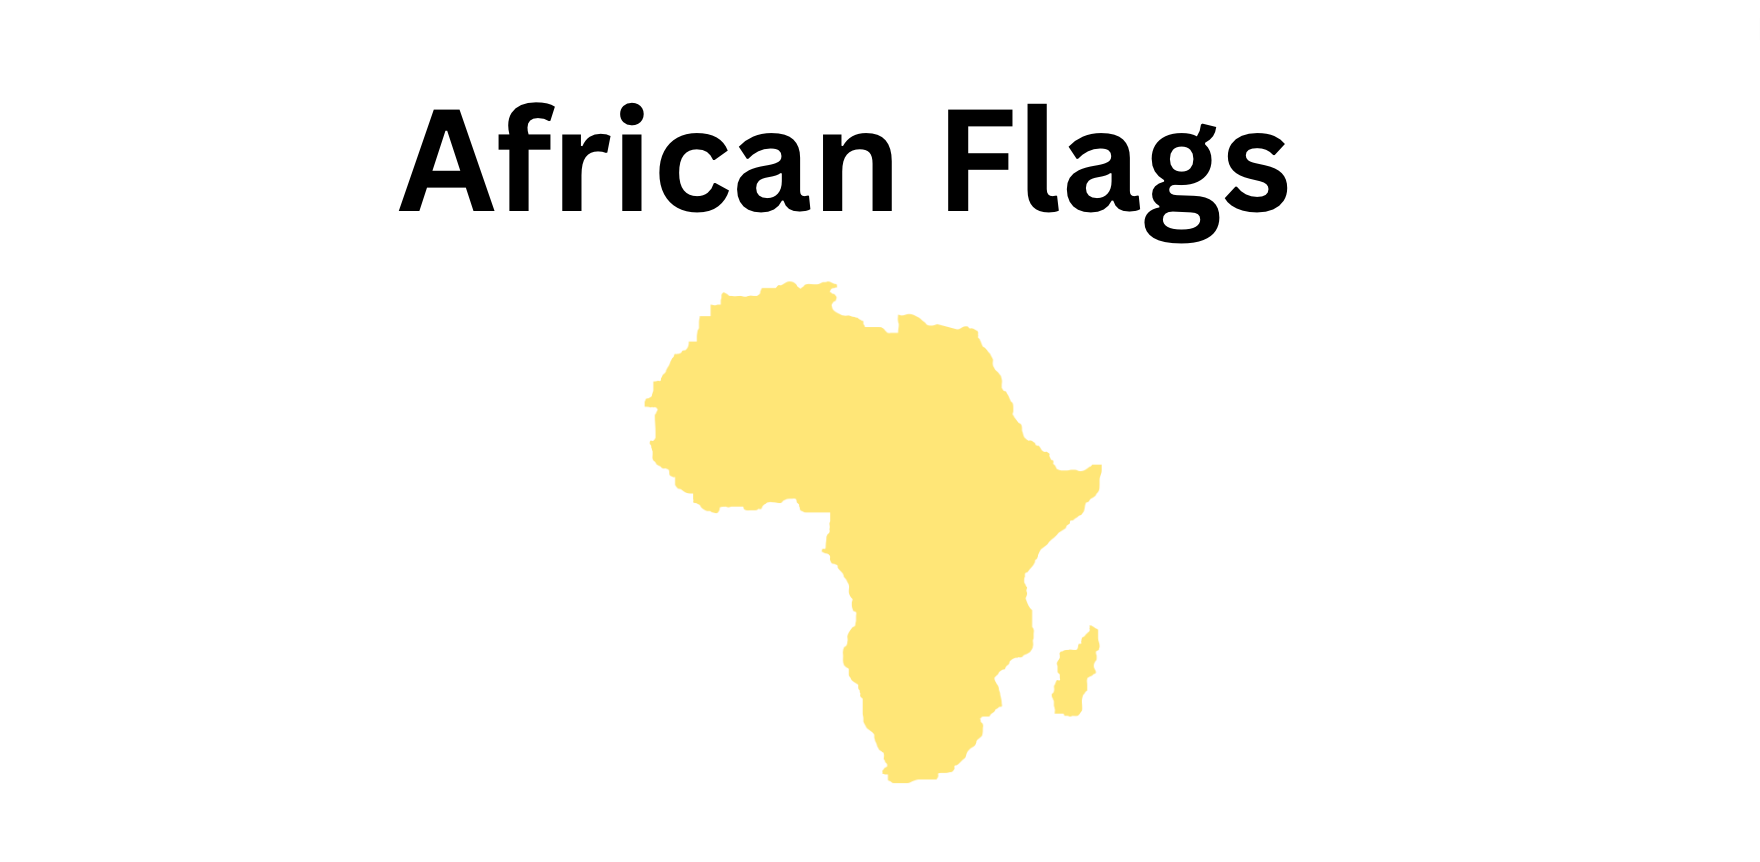  AFRICAN FLAGS